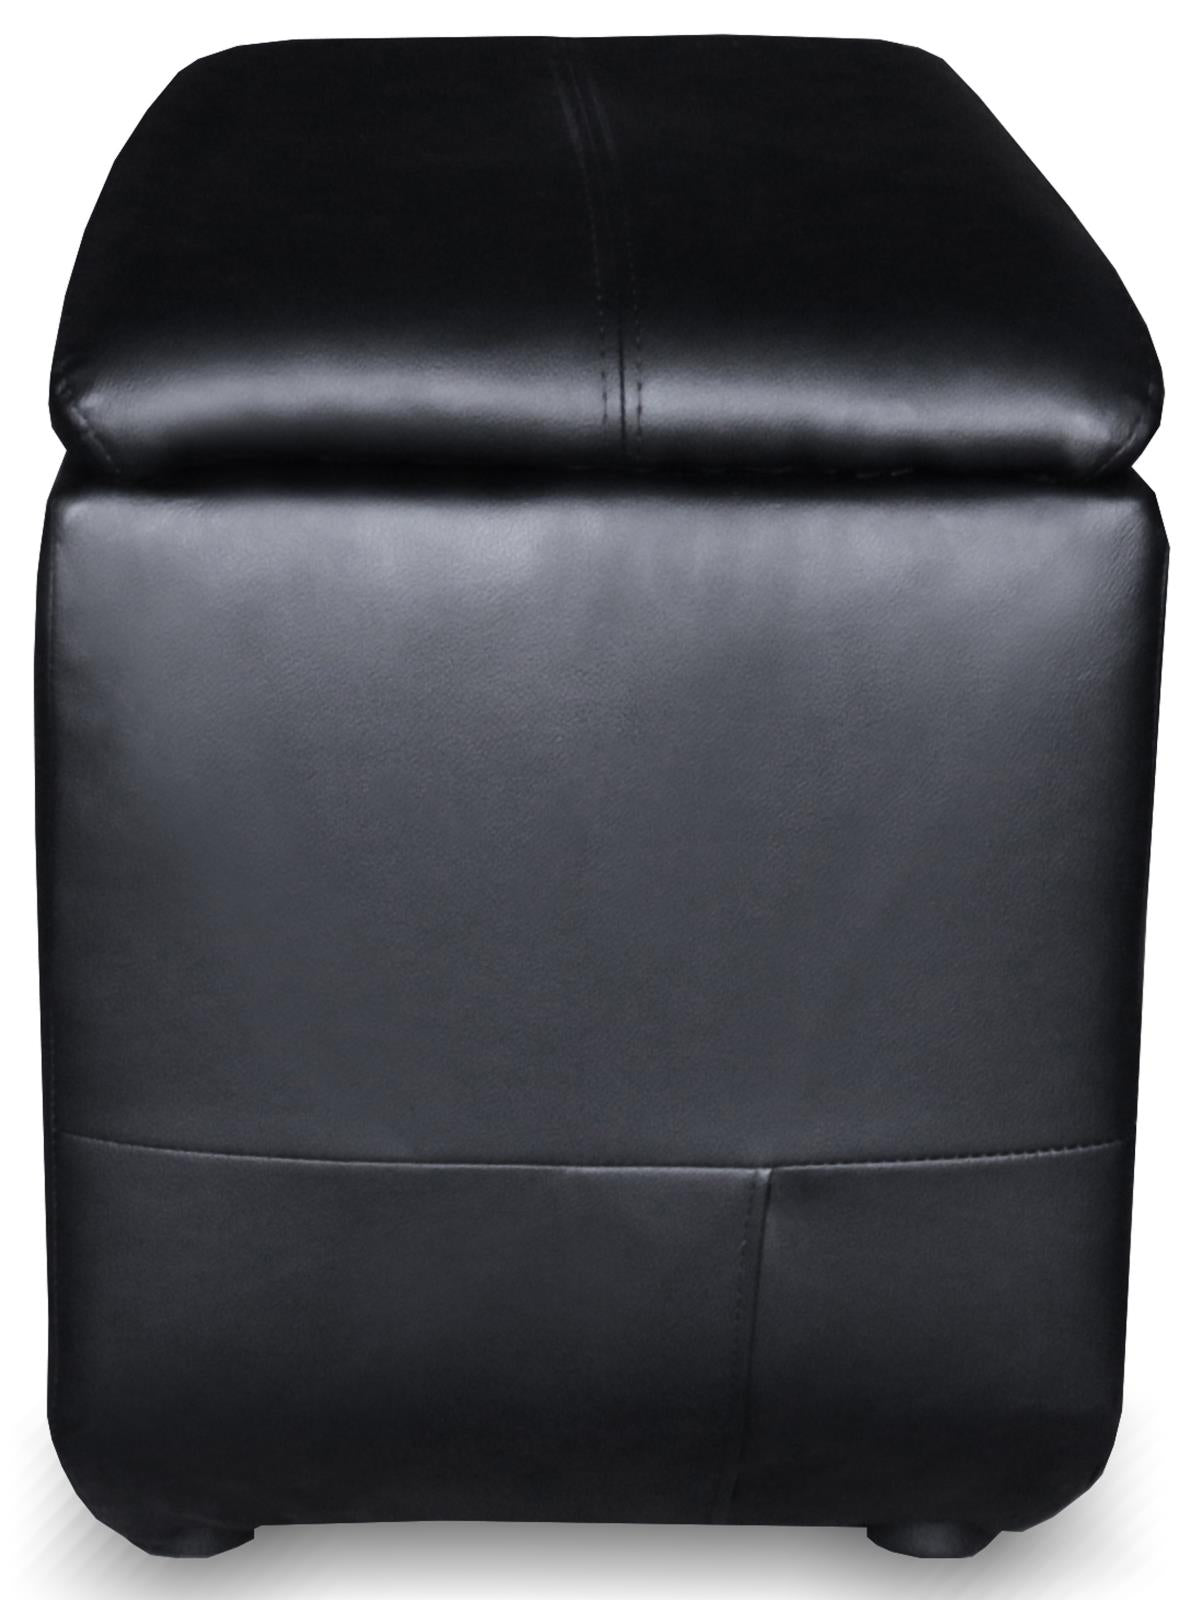 Cyrus - 7 PC THEATER SEATING (5R)